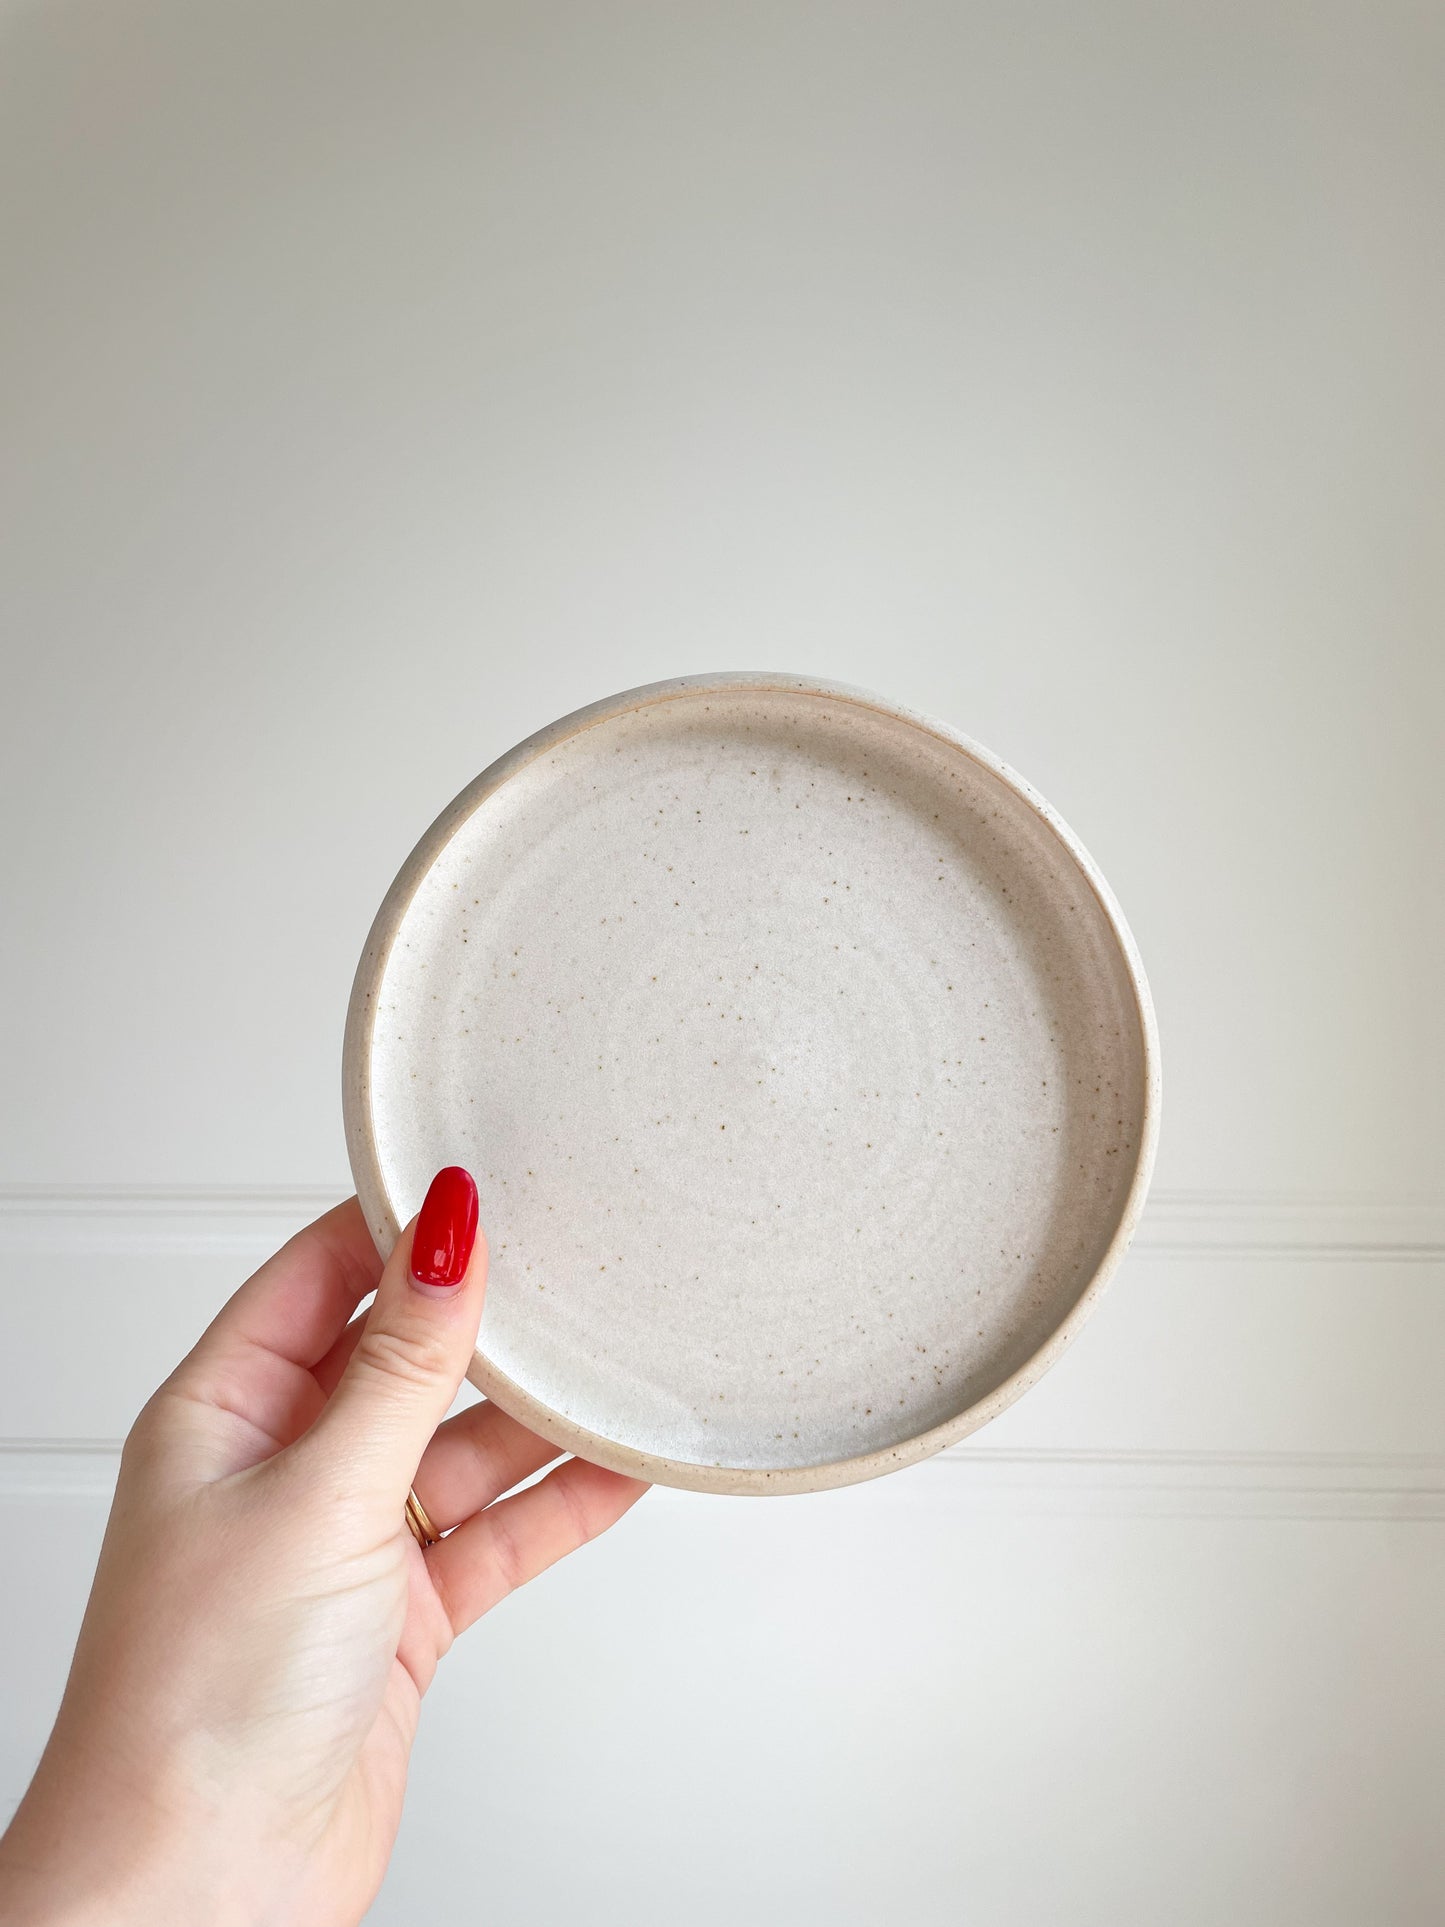 Small Neutral Speckled Plate